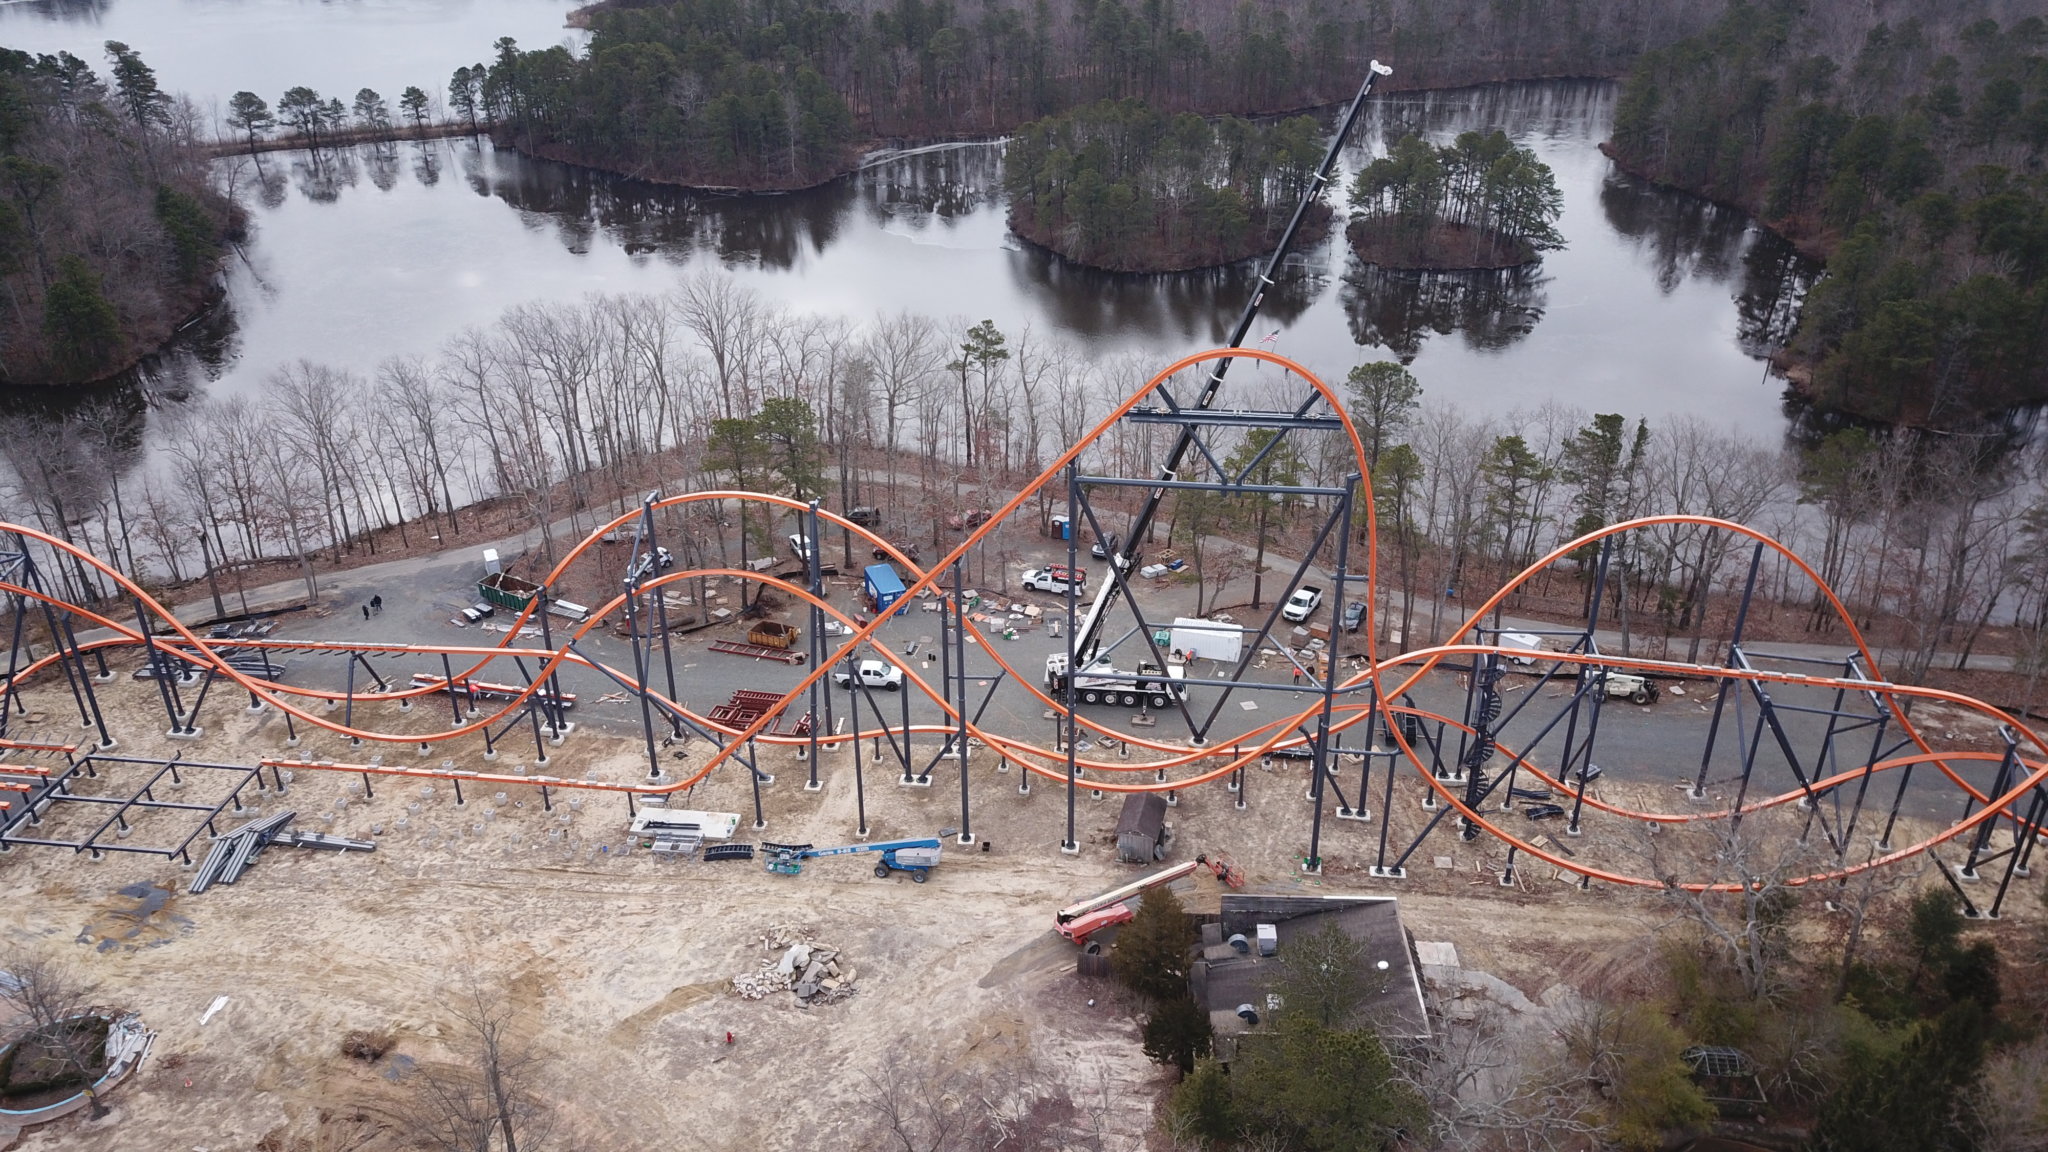 New 130foot ‘Jersey Devil’ roller coaster tops off at Six Flags Great